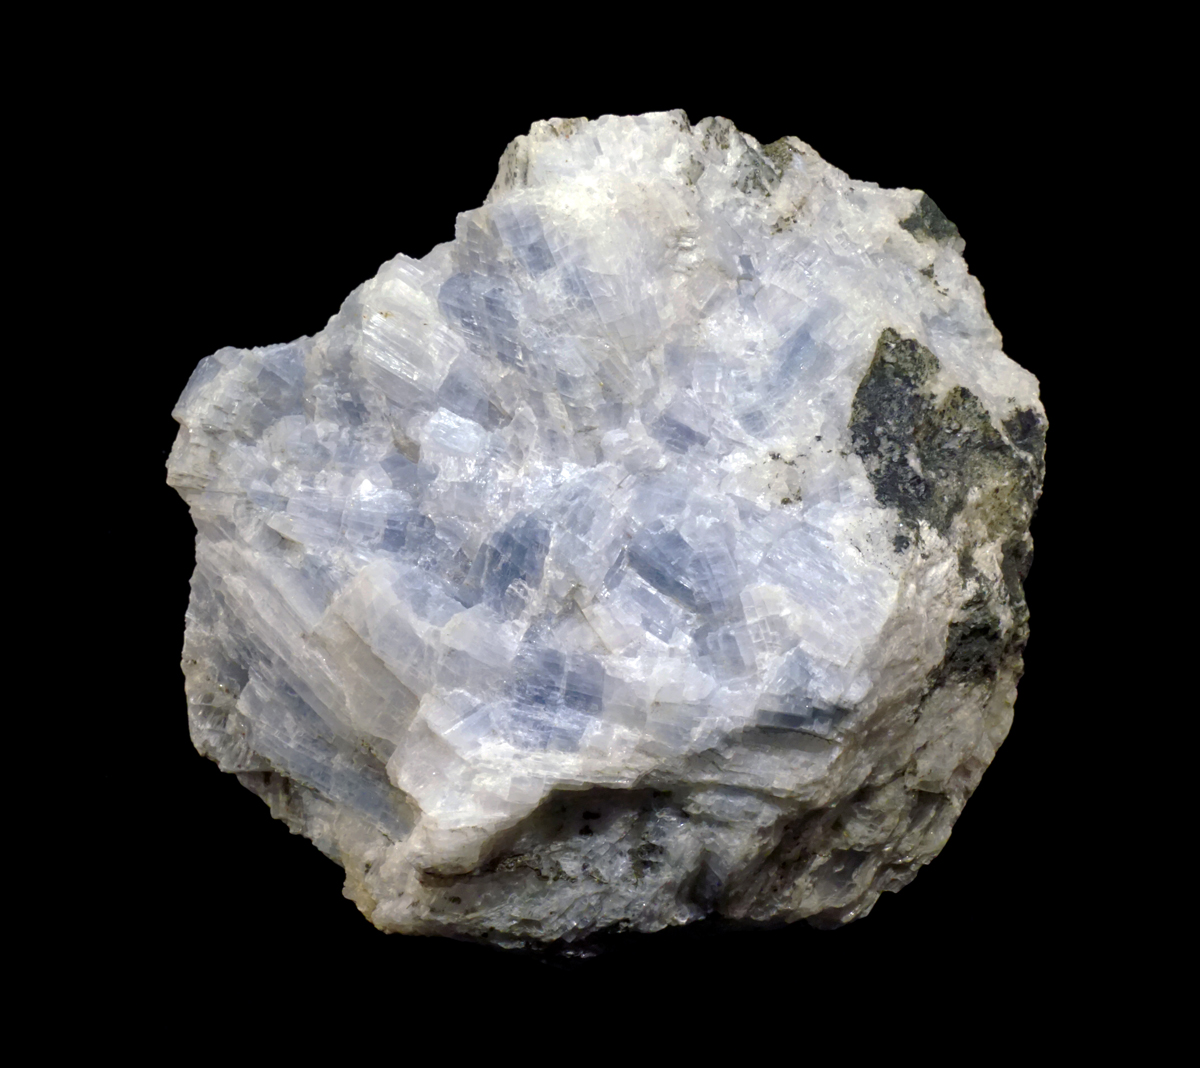 Blue Anhydrite Crystal Group from Braen's Quarry, Haledon, Passaic Co., New Jersey